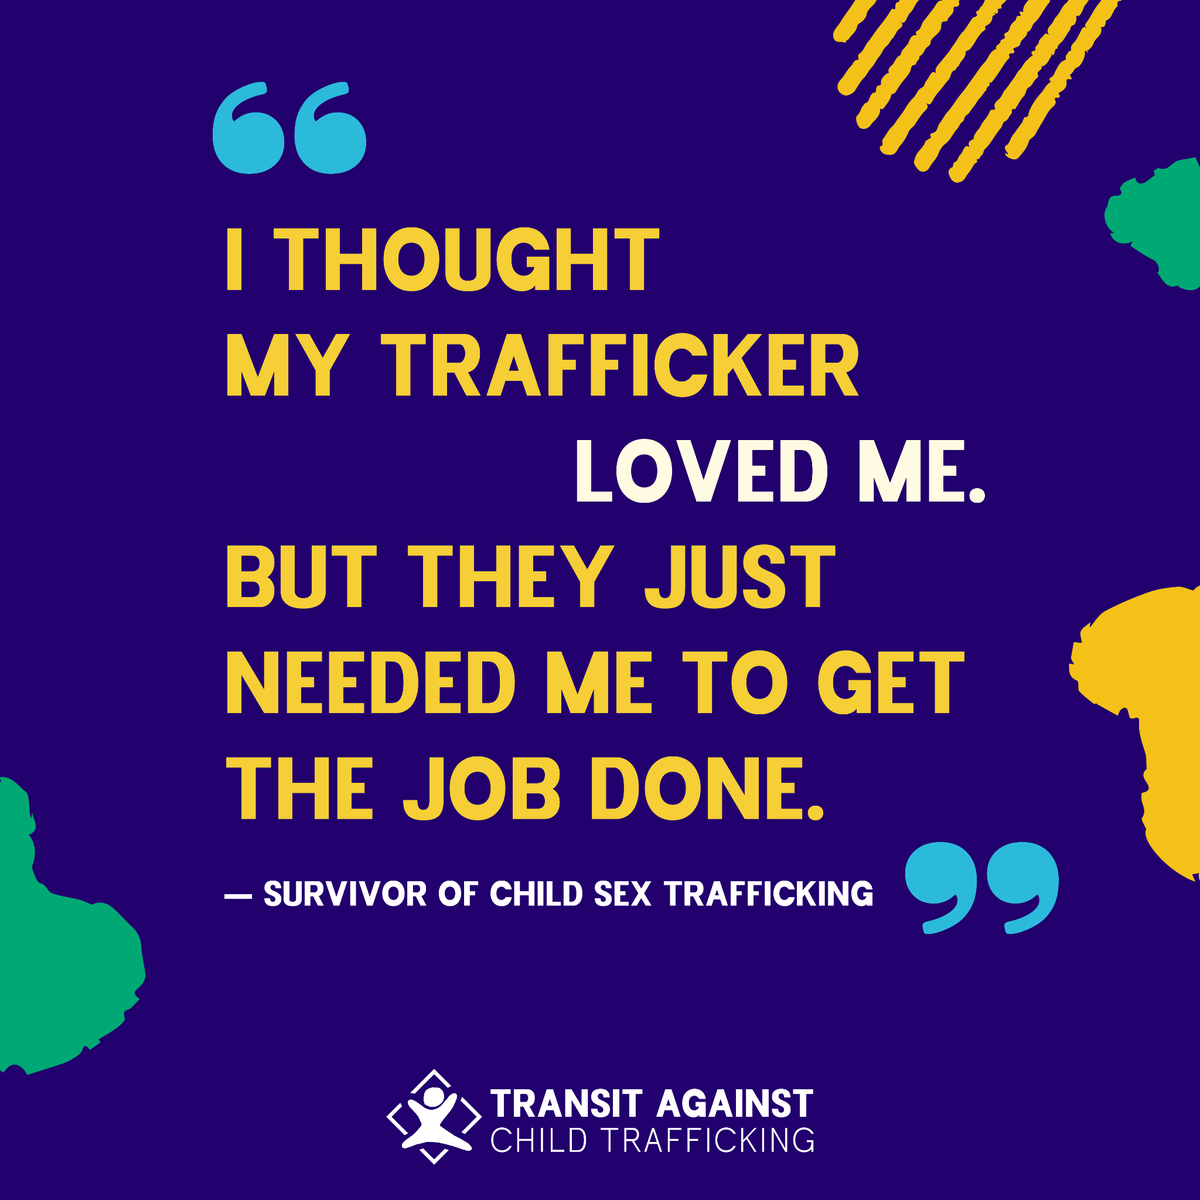 Alexandria rides together against child trafficking. When we #KnowTheSigns of child sex trafficking on public transit, we can safely report suspicious activity. Join us to stop child trafficking: wearepact.org/tact-campaign